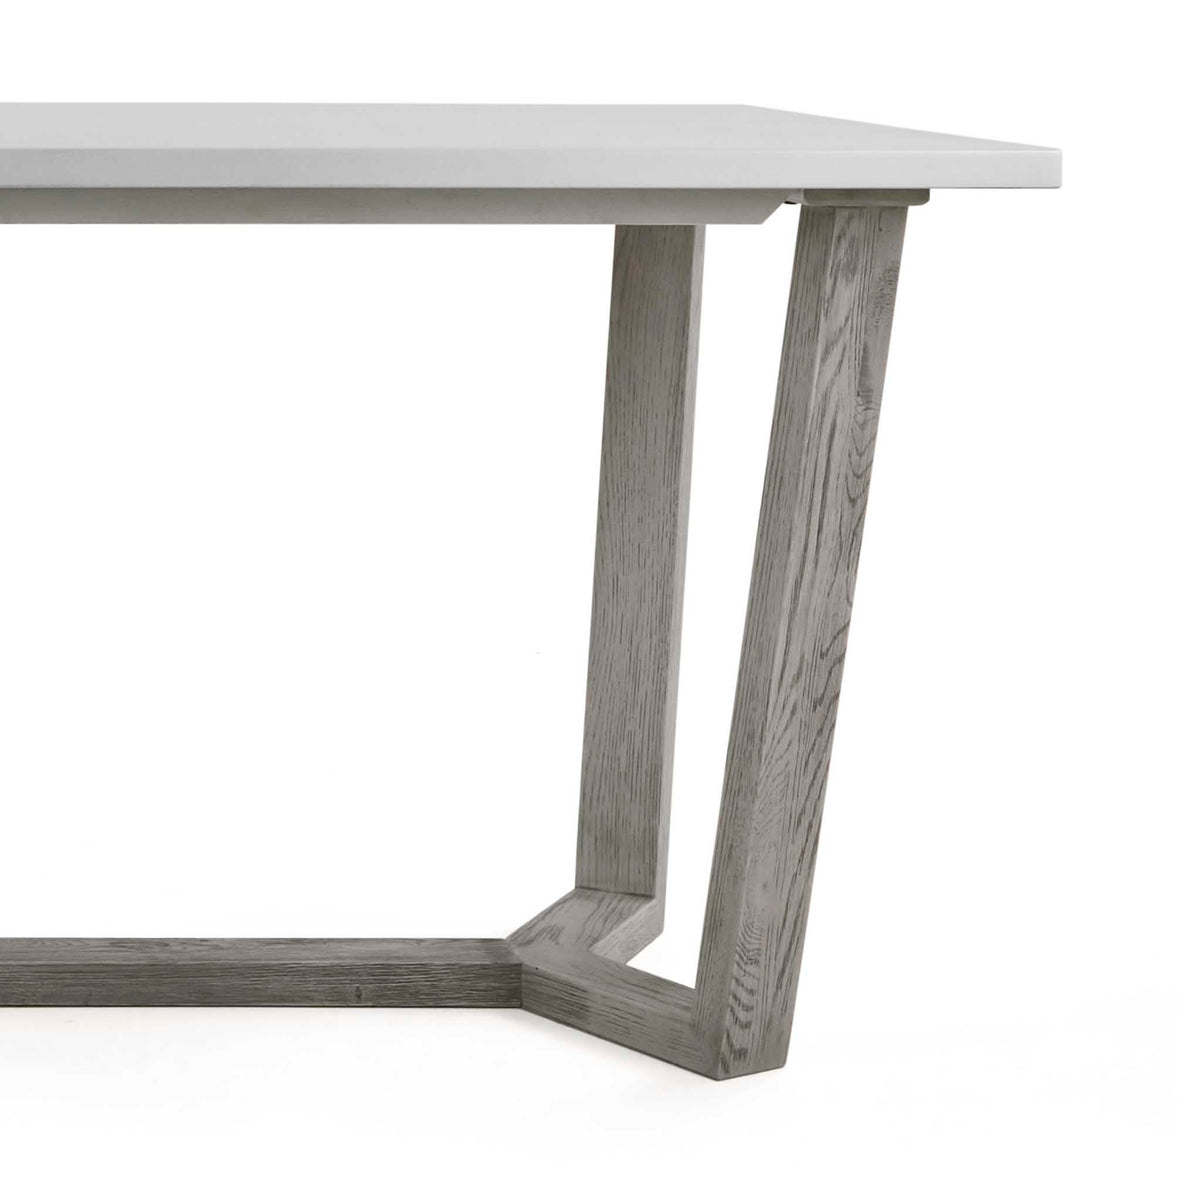 Epsom 150cm Rectangular Dining Table with grey washed legs